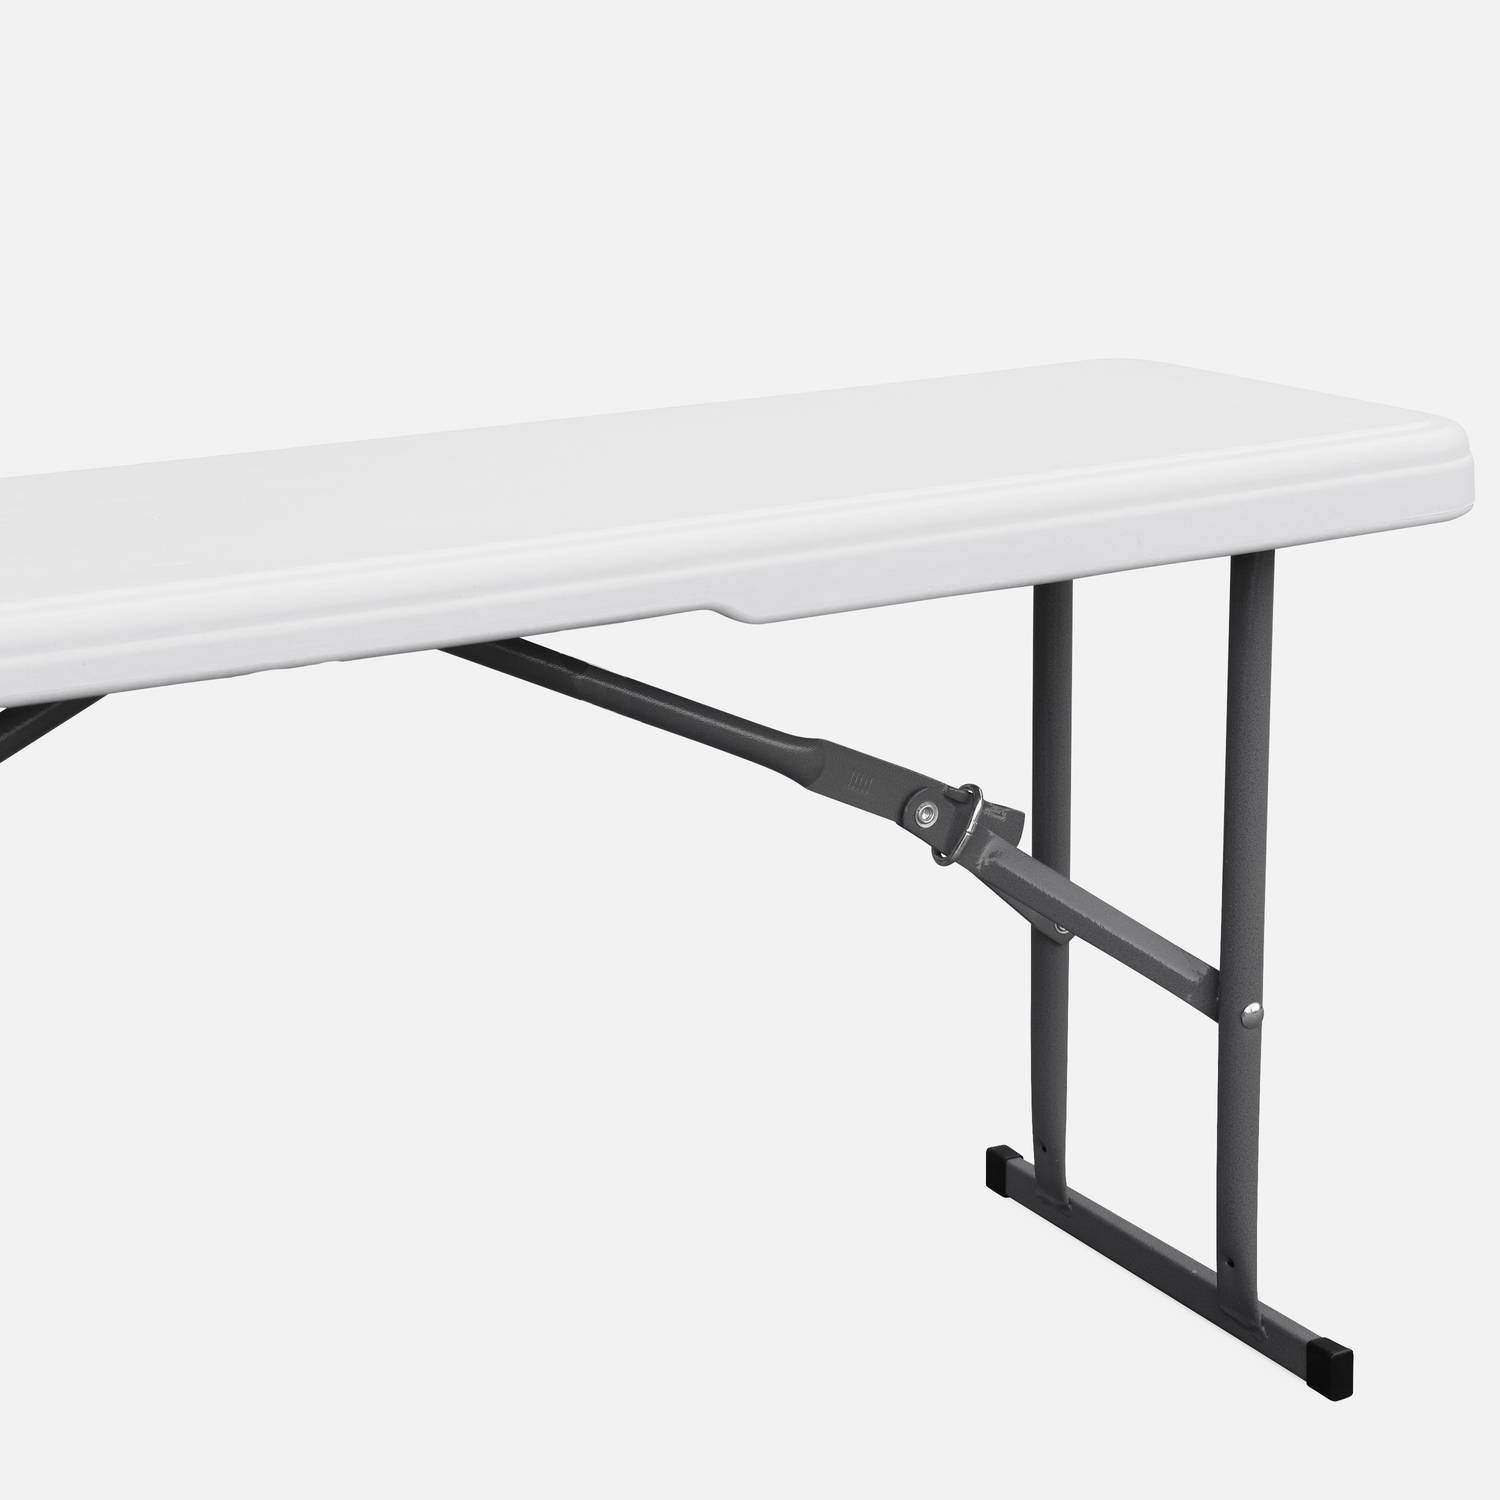 Reception table and bench set, 180cm, foldable, with carrying handle, white plastic Photo5